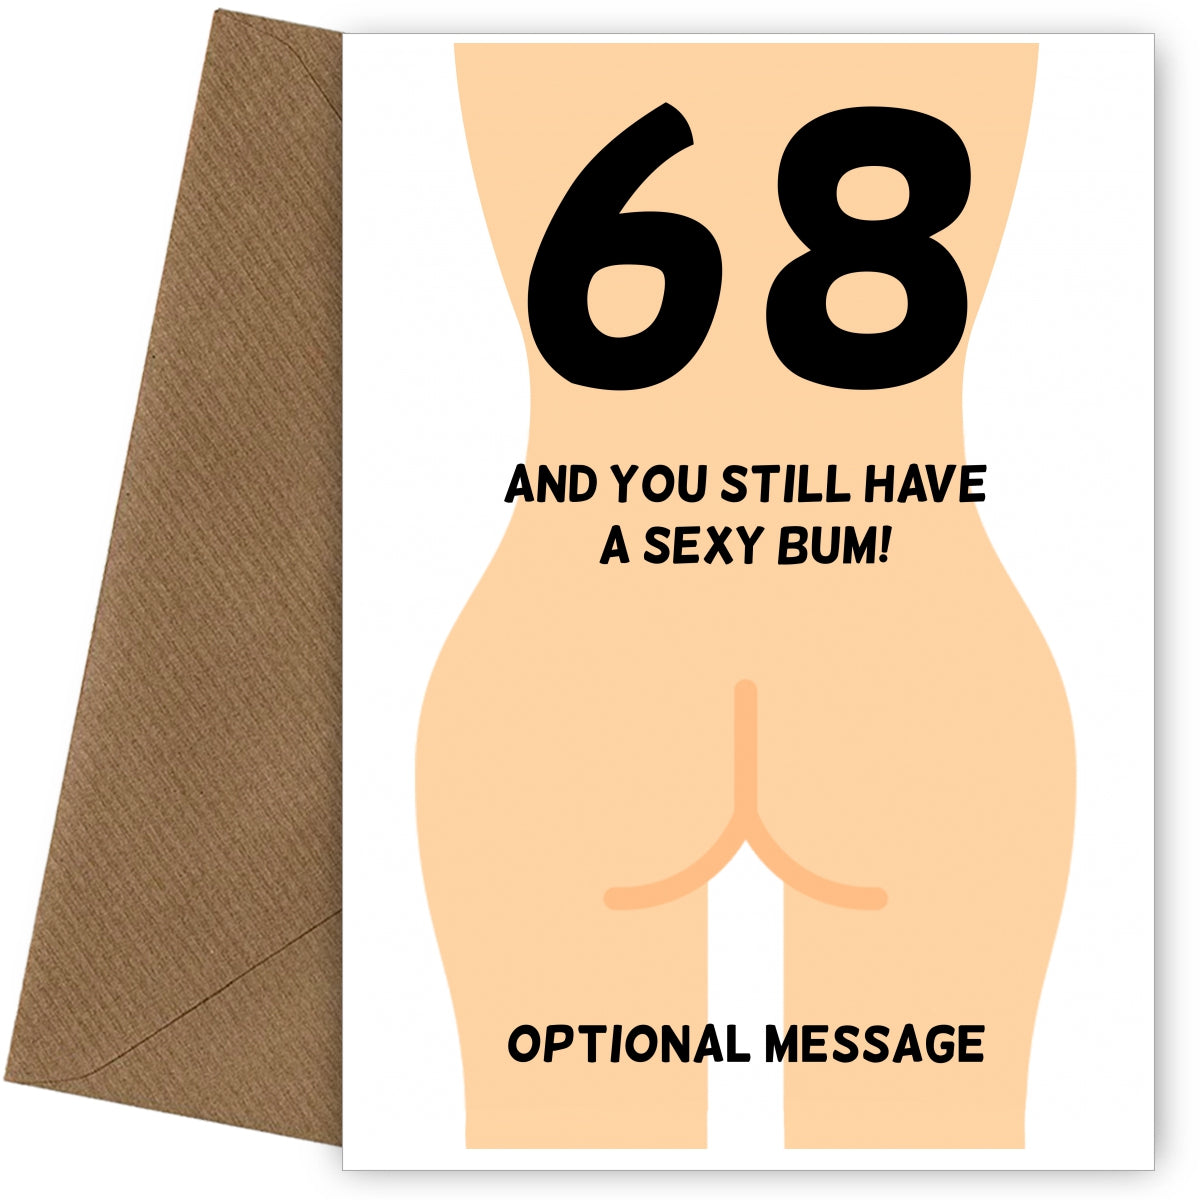 Happy 68th Birthday Card - 68 and Still Have a Sexy Bum!